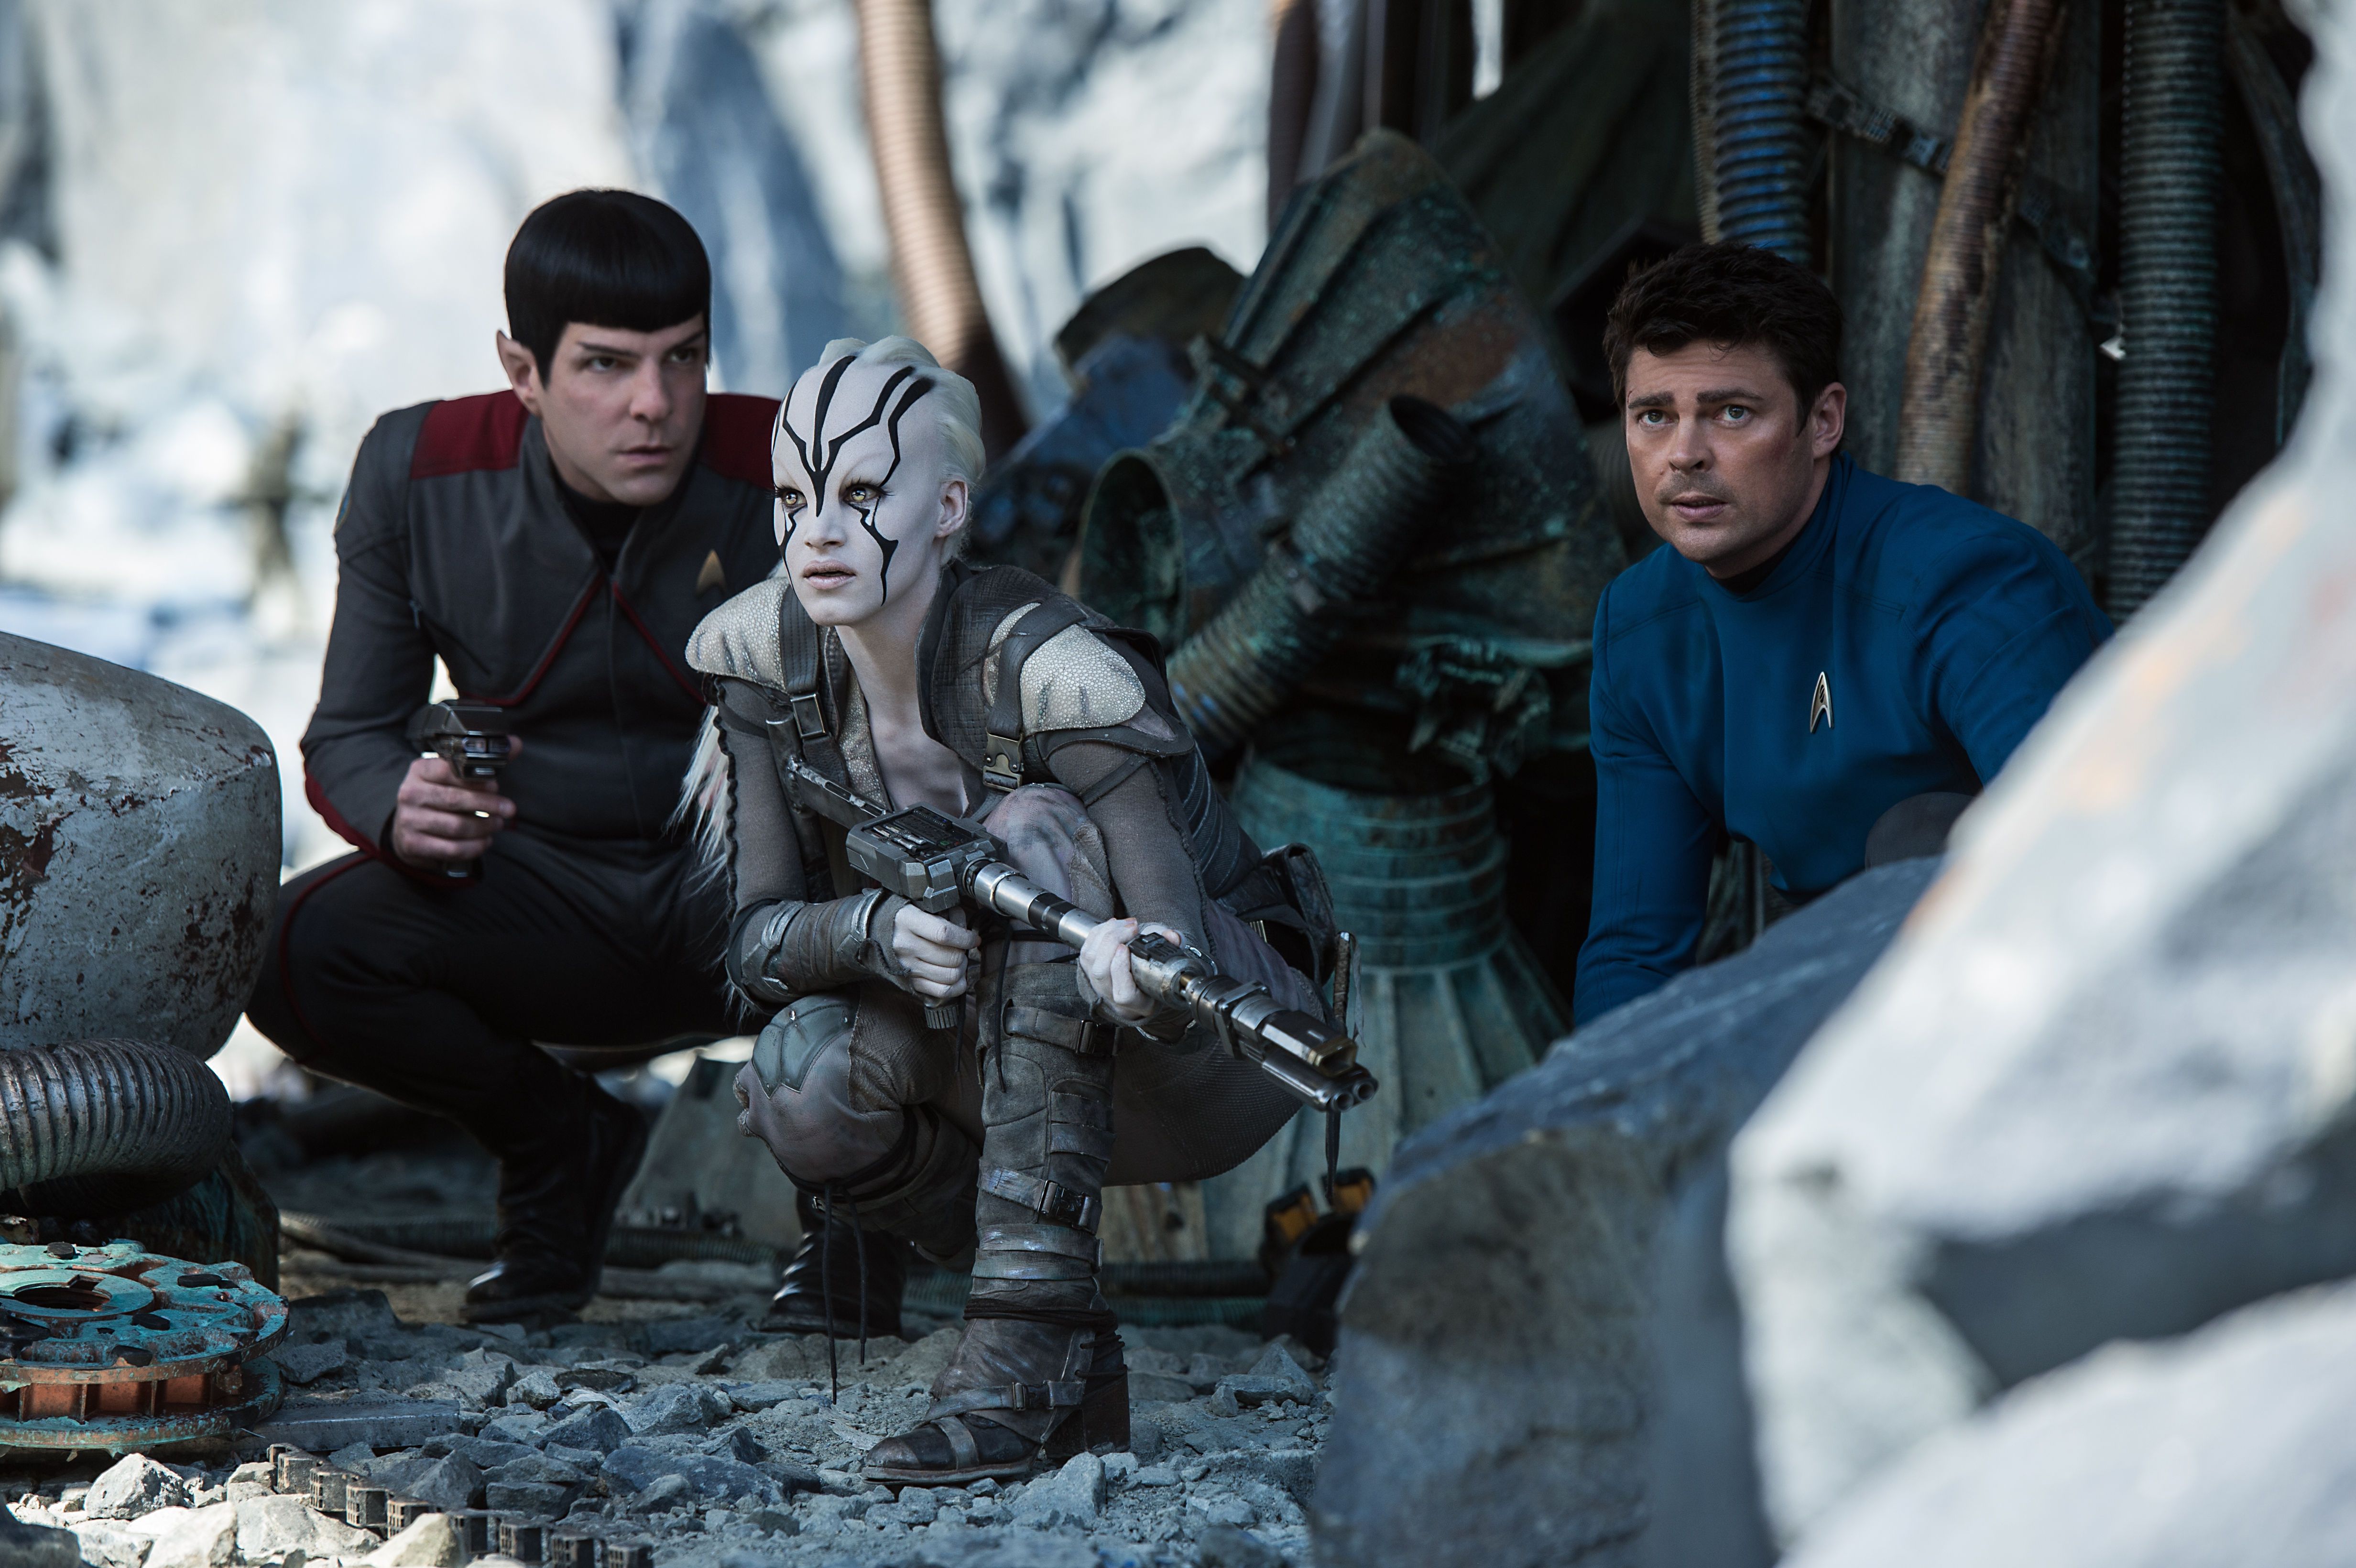 Zachary Quinto plays Spock, Sofia Boutella plays Jaylah and Karl Urban plays Bones in Star Trek Beyond